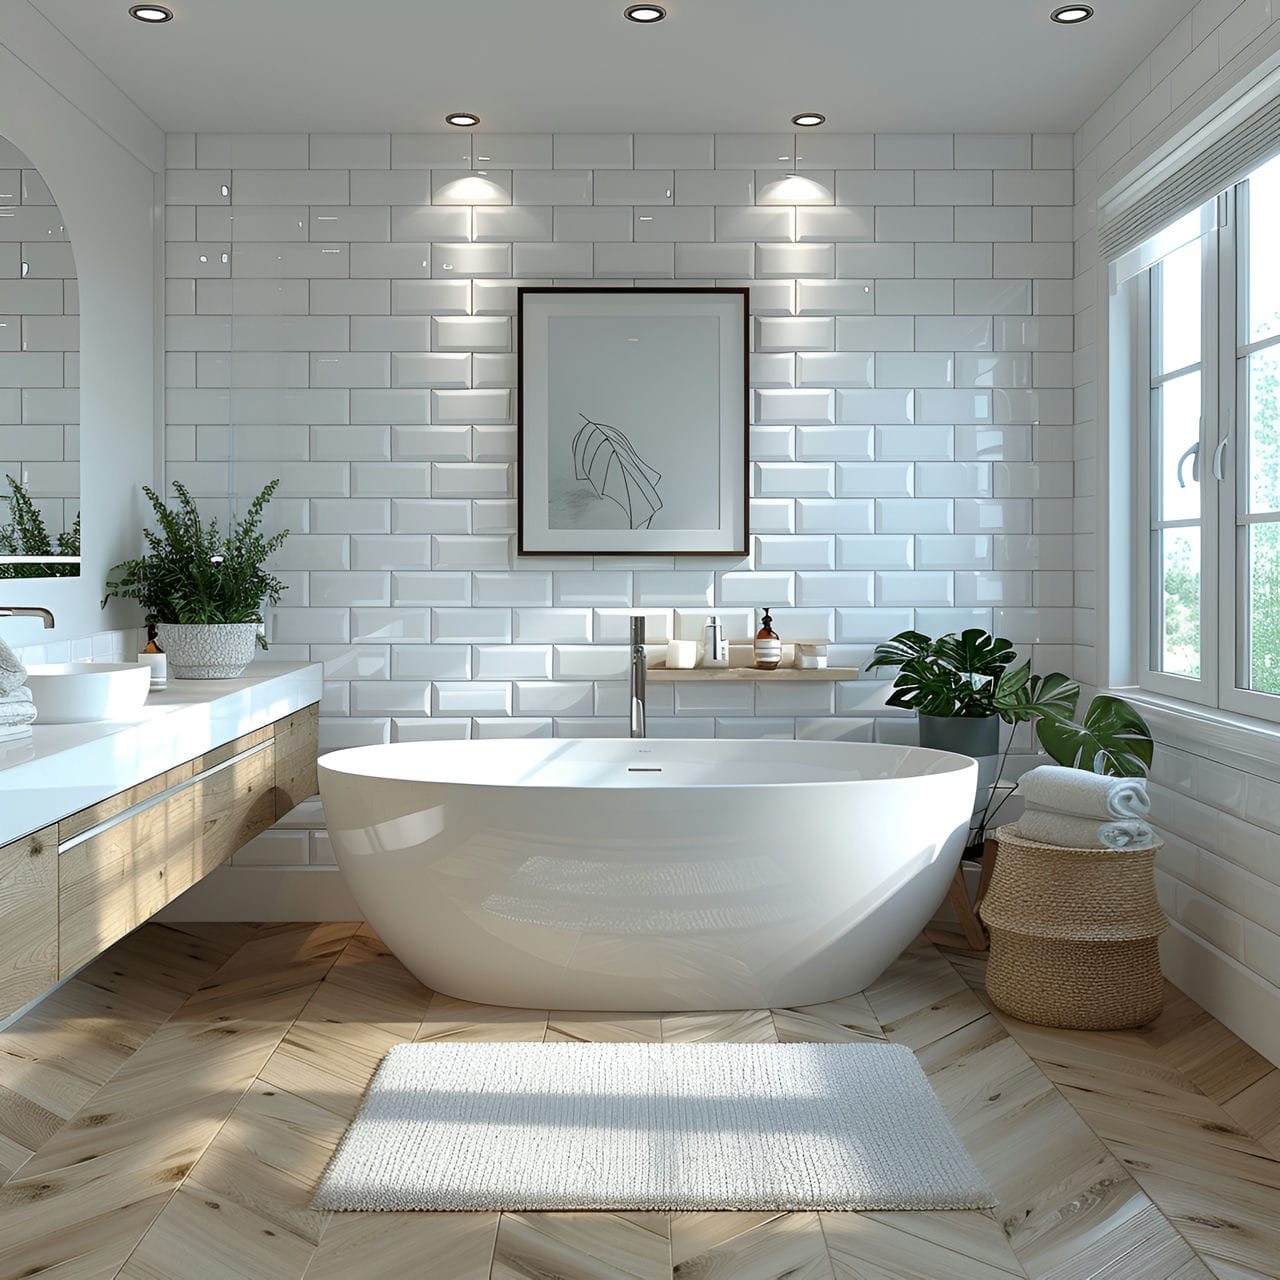 Ensuite bathroom: size, functionality, uses, furniture and renovation